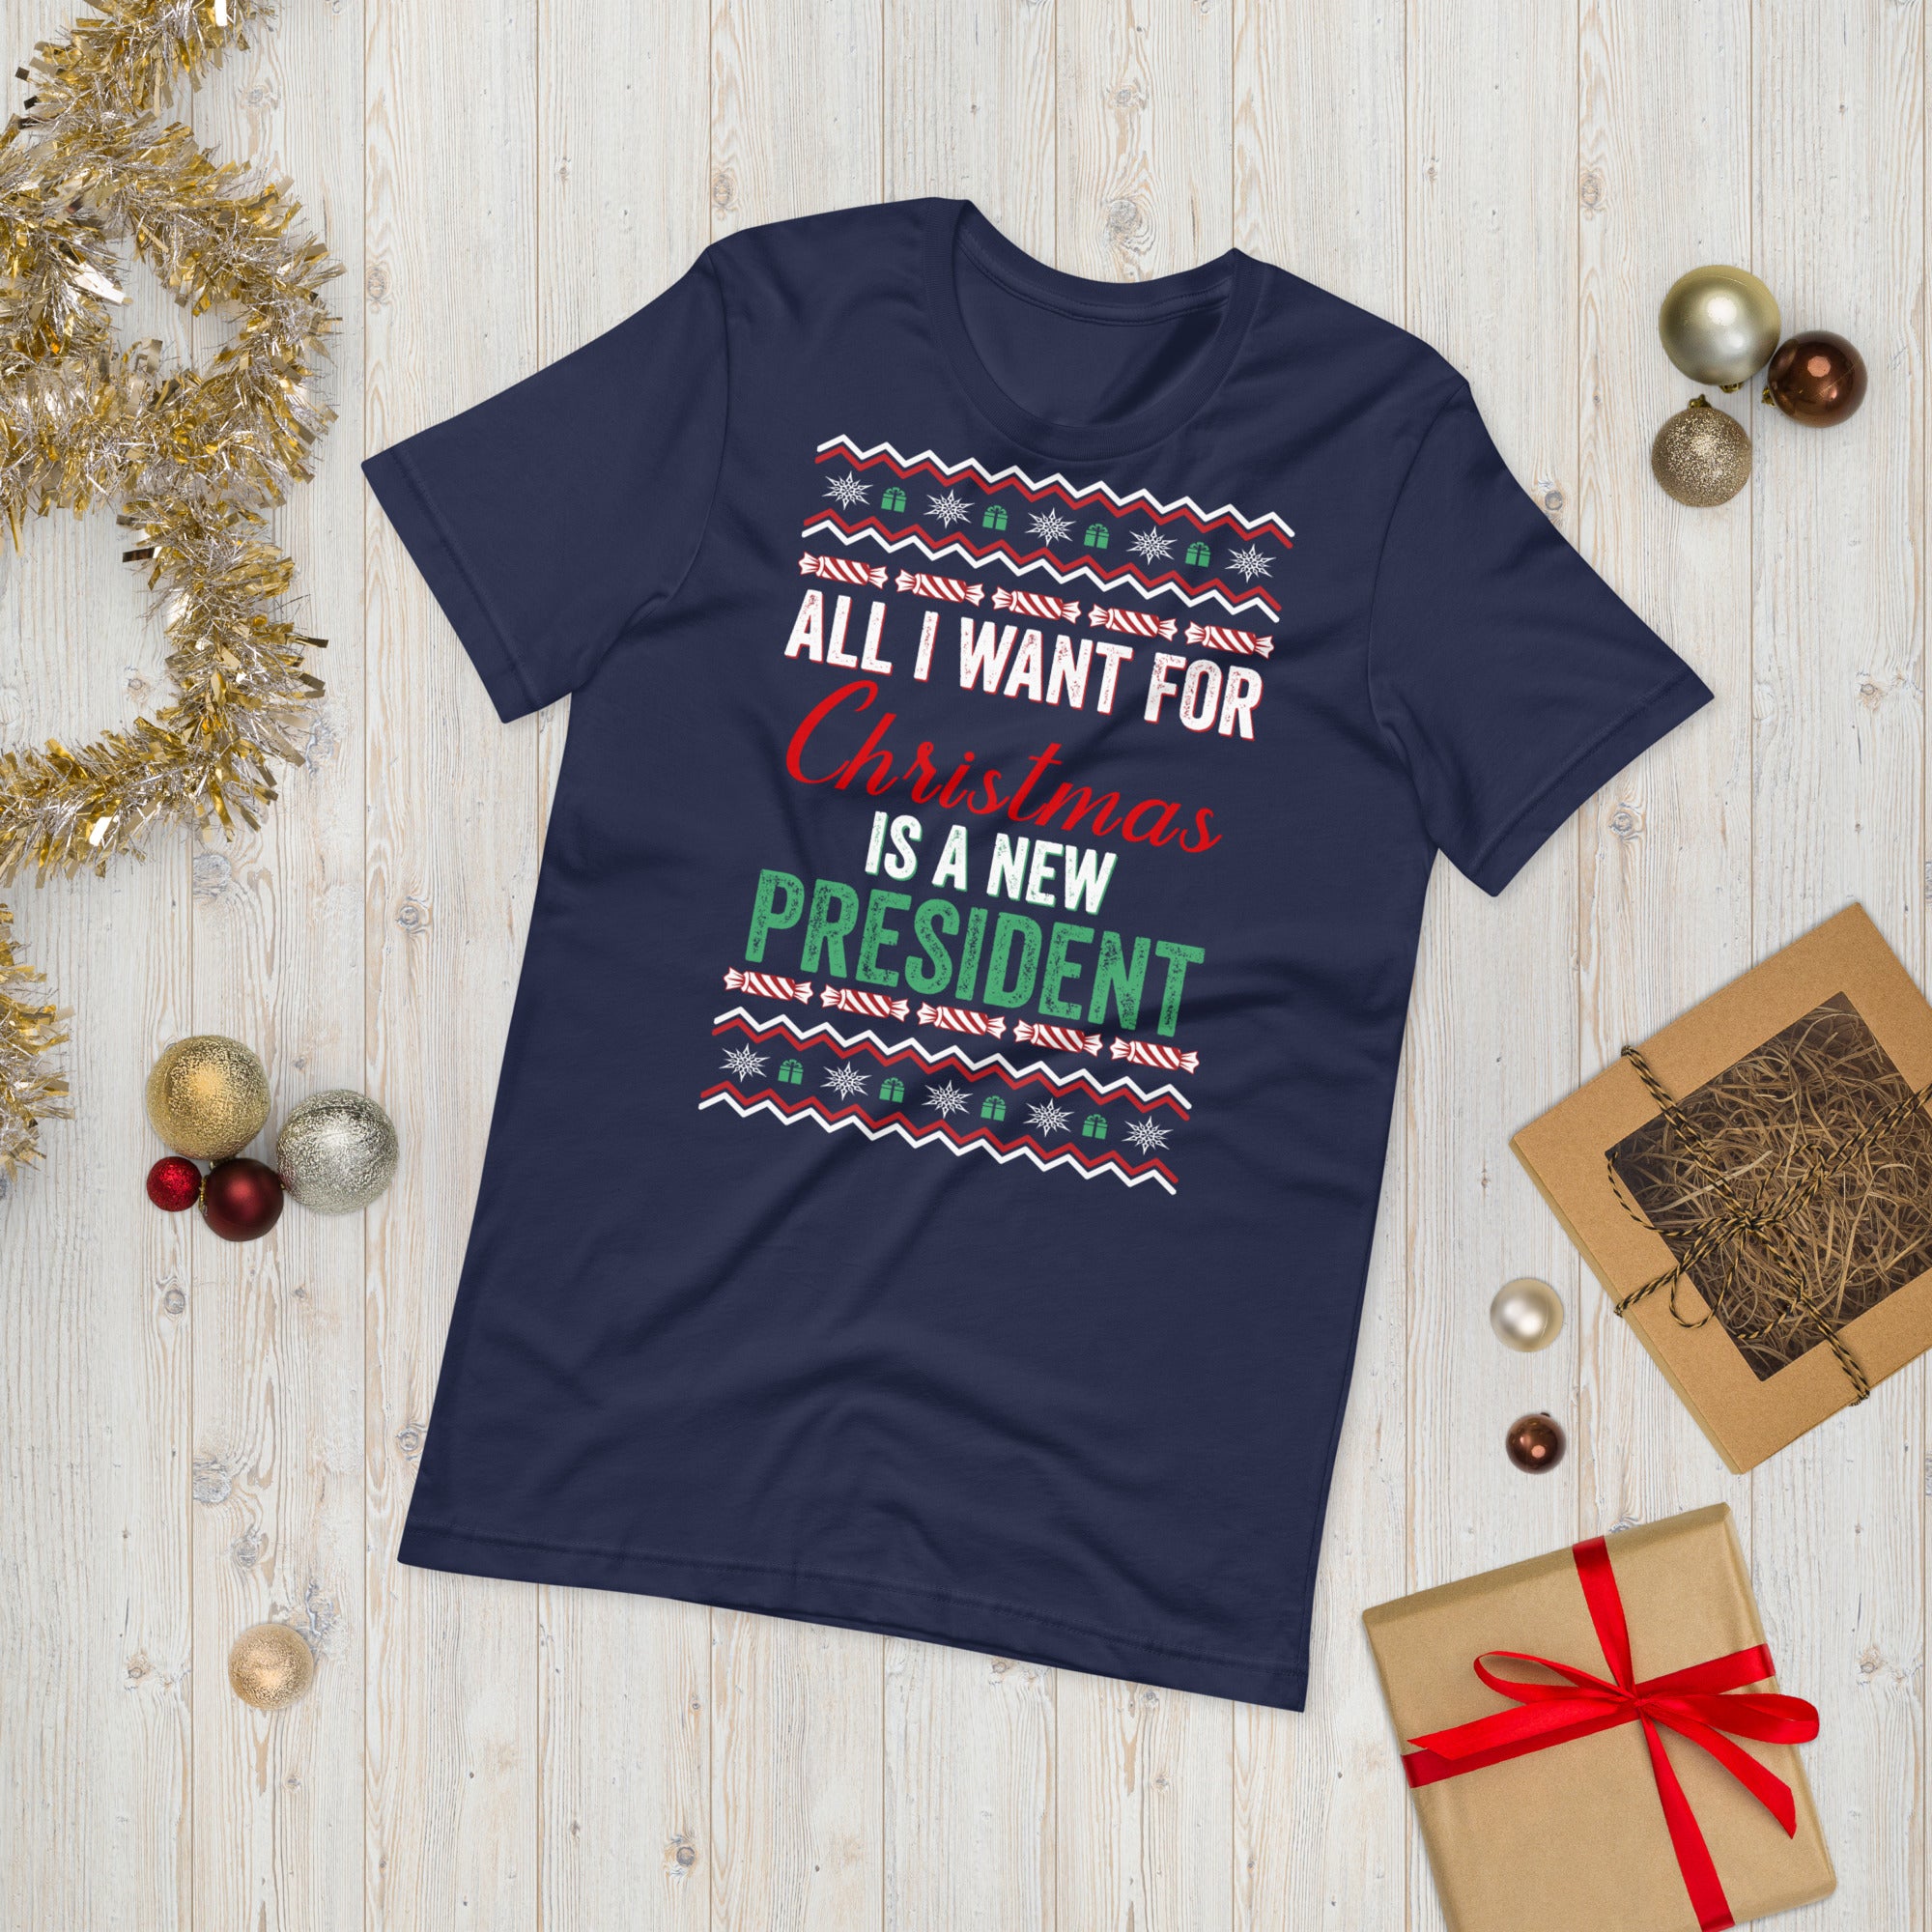 All I Want For Christmas Is A New President, FJB Christmas Shirt, Anti Biden Christmas Shirt, Conservative Shirt, FJB Shirt, Patriot Xmas - Madeinsea©